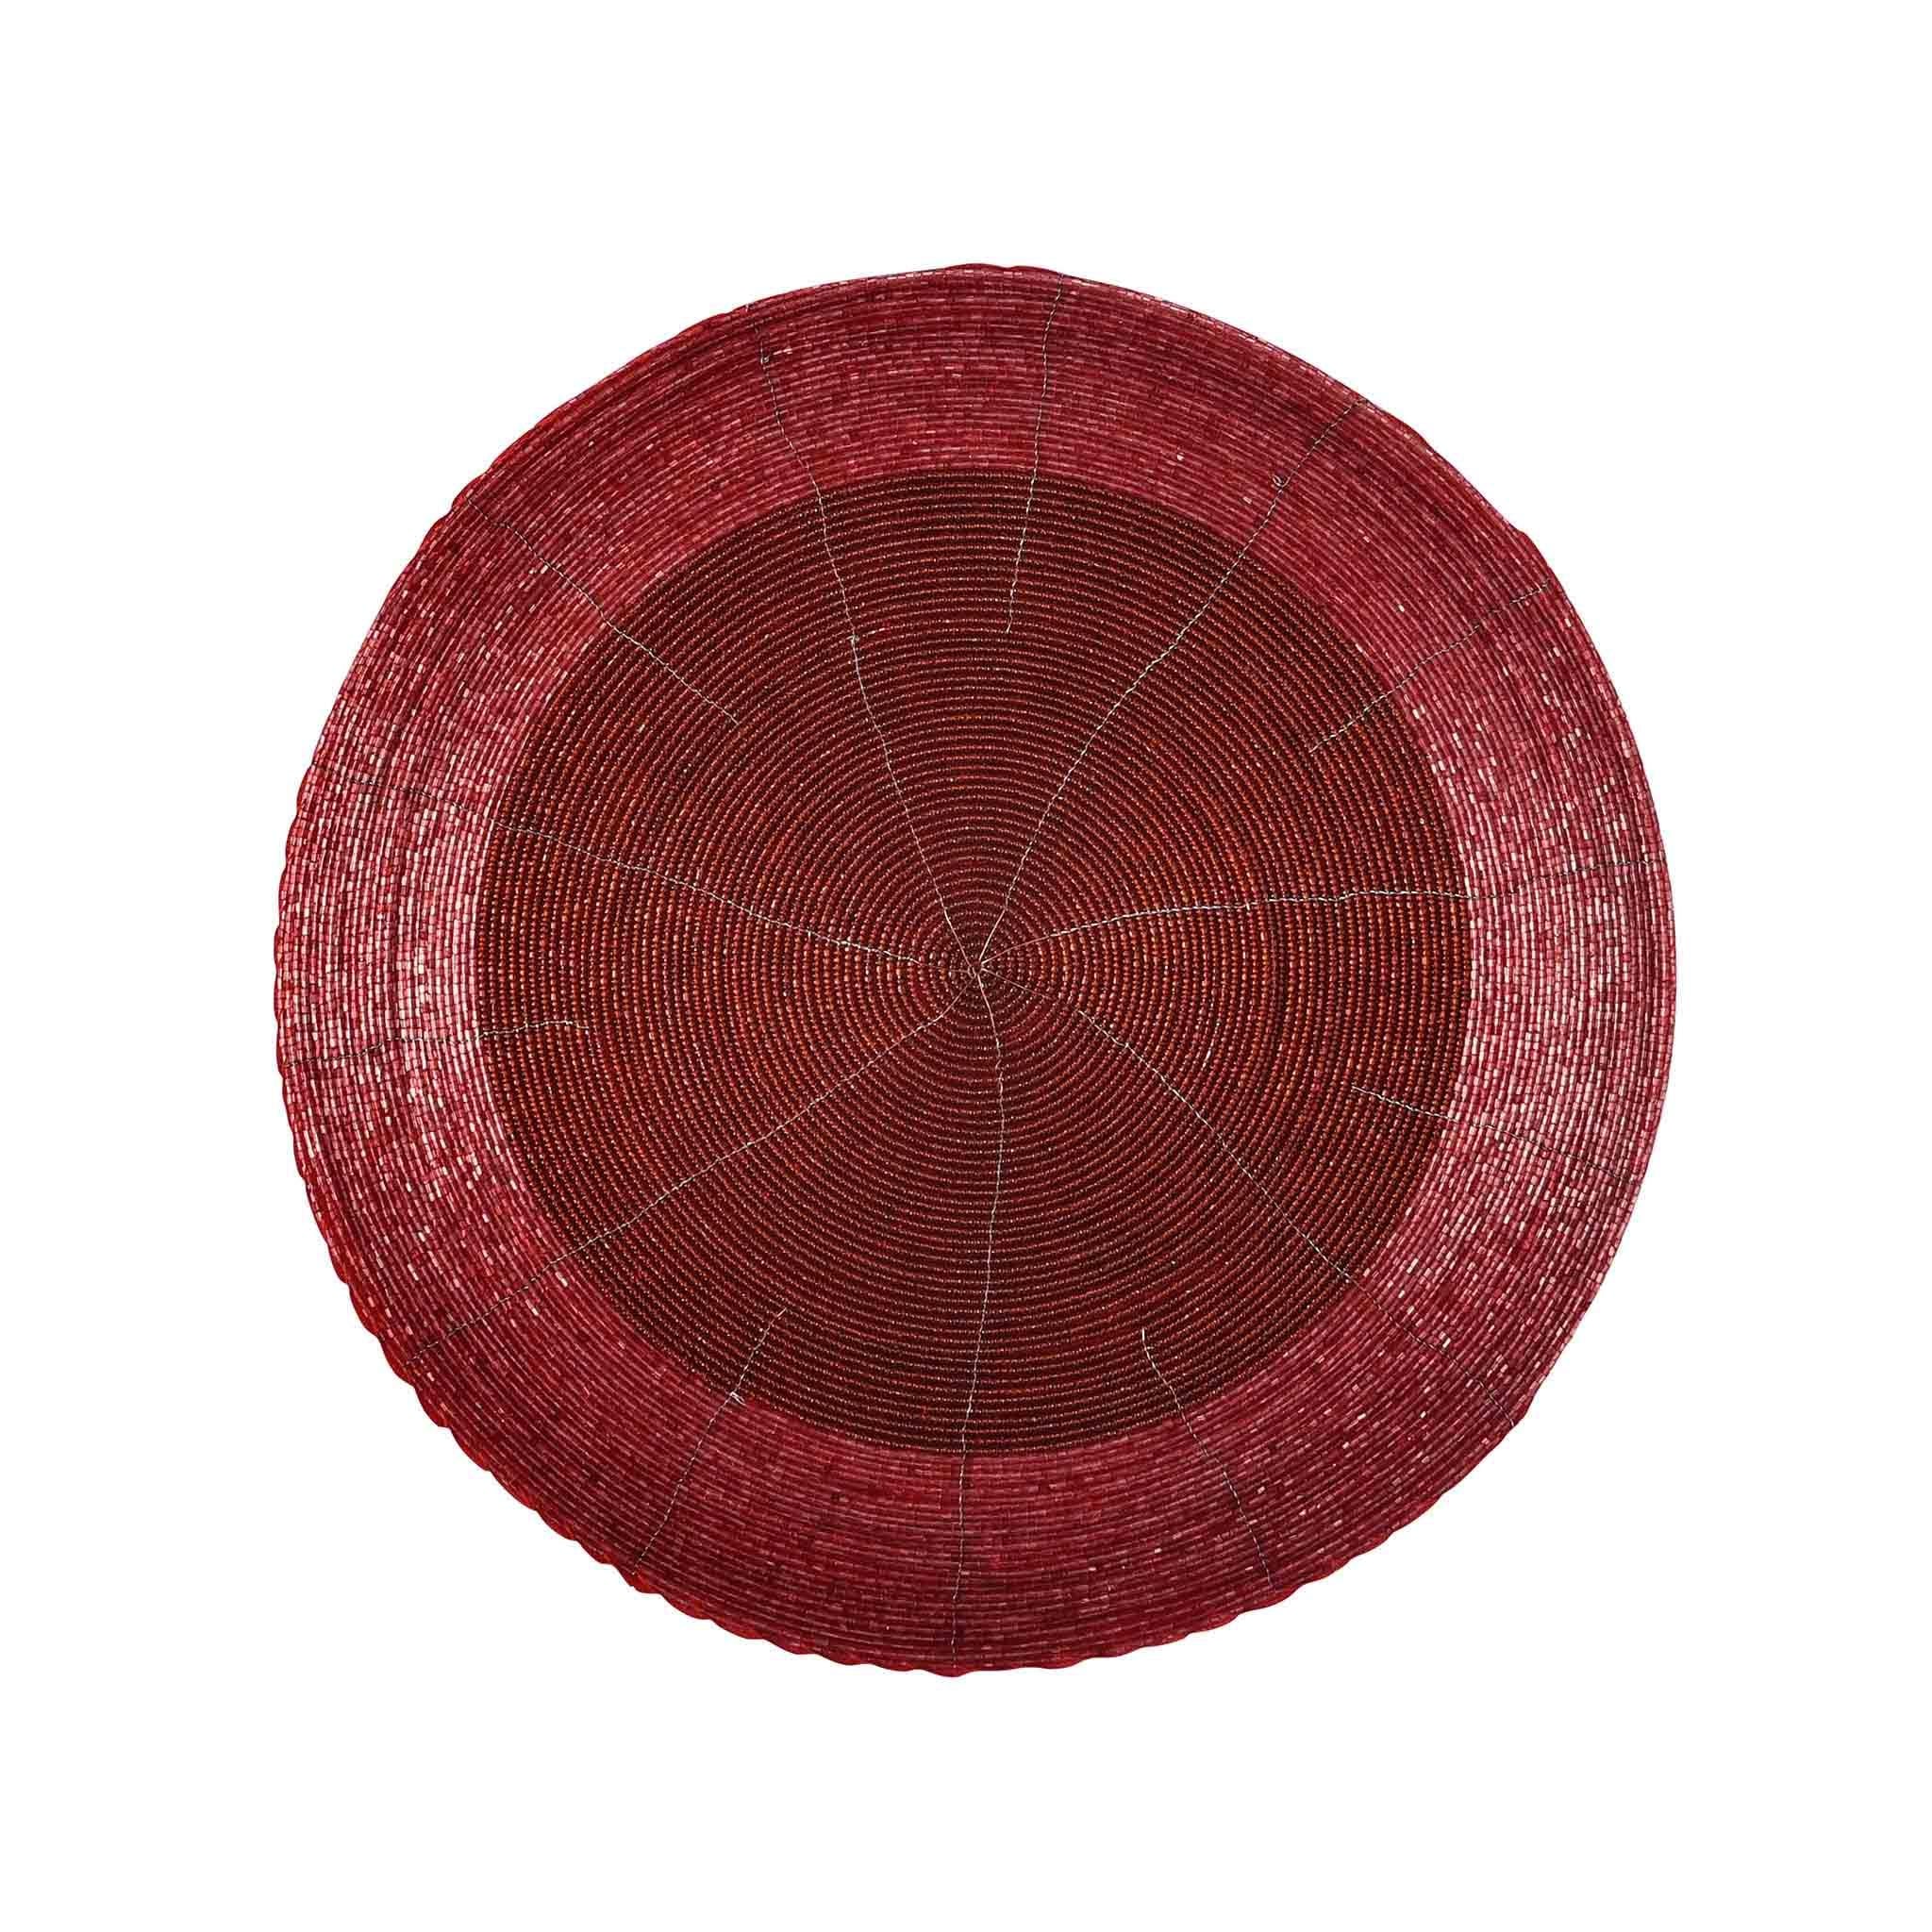 Glass Beaded Placemat <br>Color: Red Two-Tone<br>Size: 14" Round<br>Set of 4 - Trunkin' USA